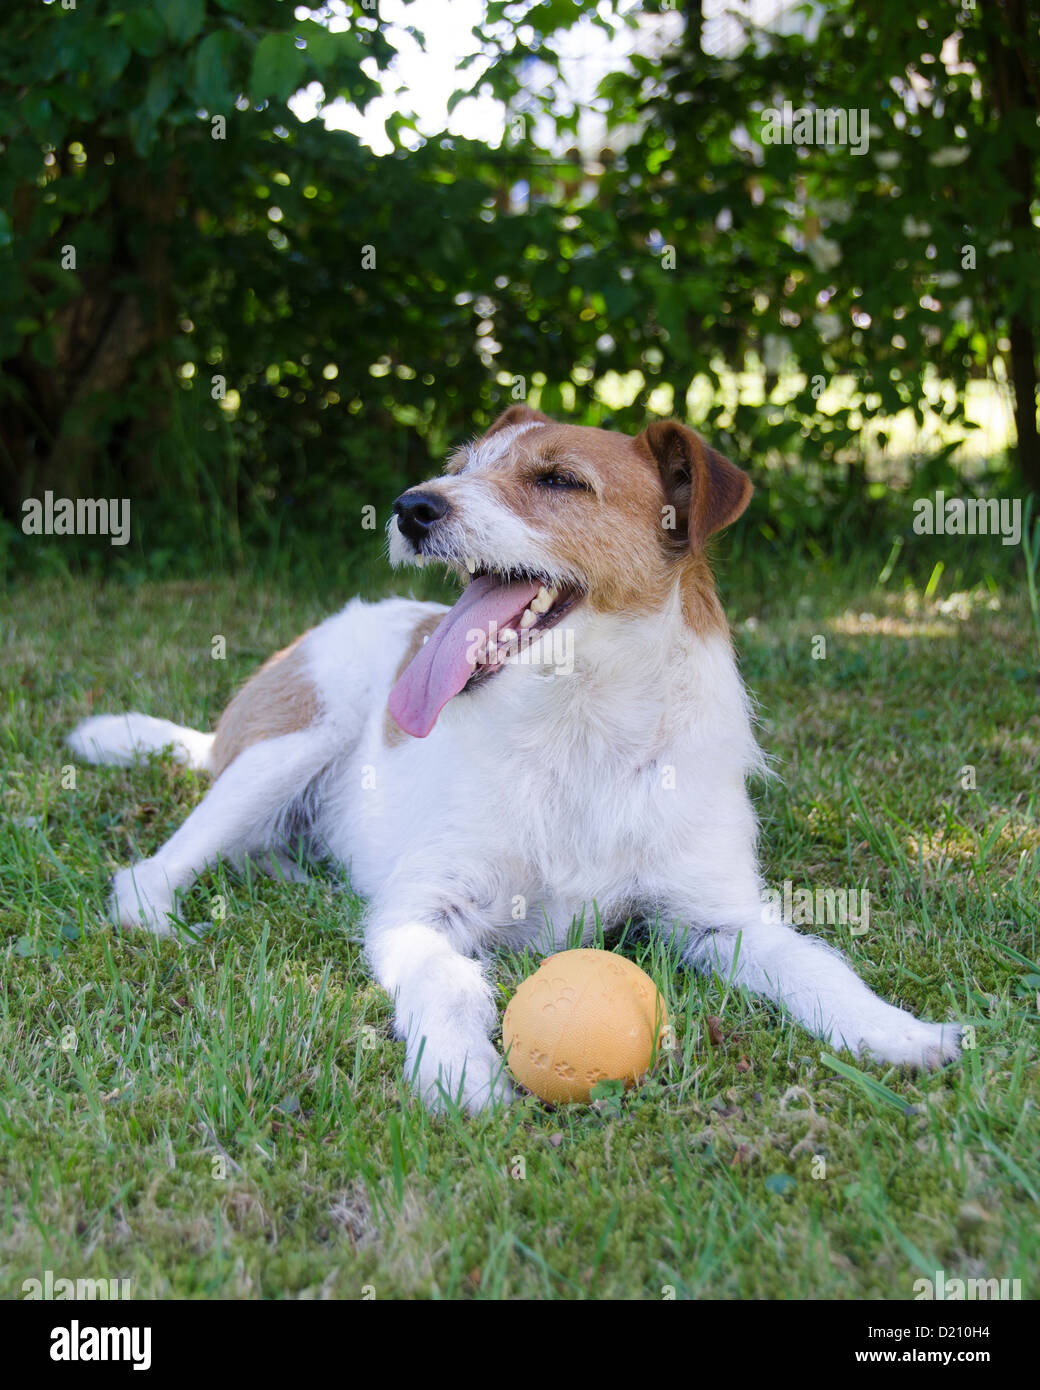 Parson Jack Russell Terrier Dog with Tongue Out Stock Photo